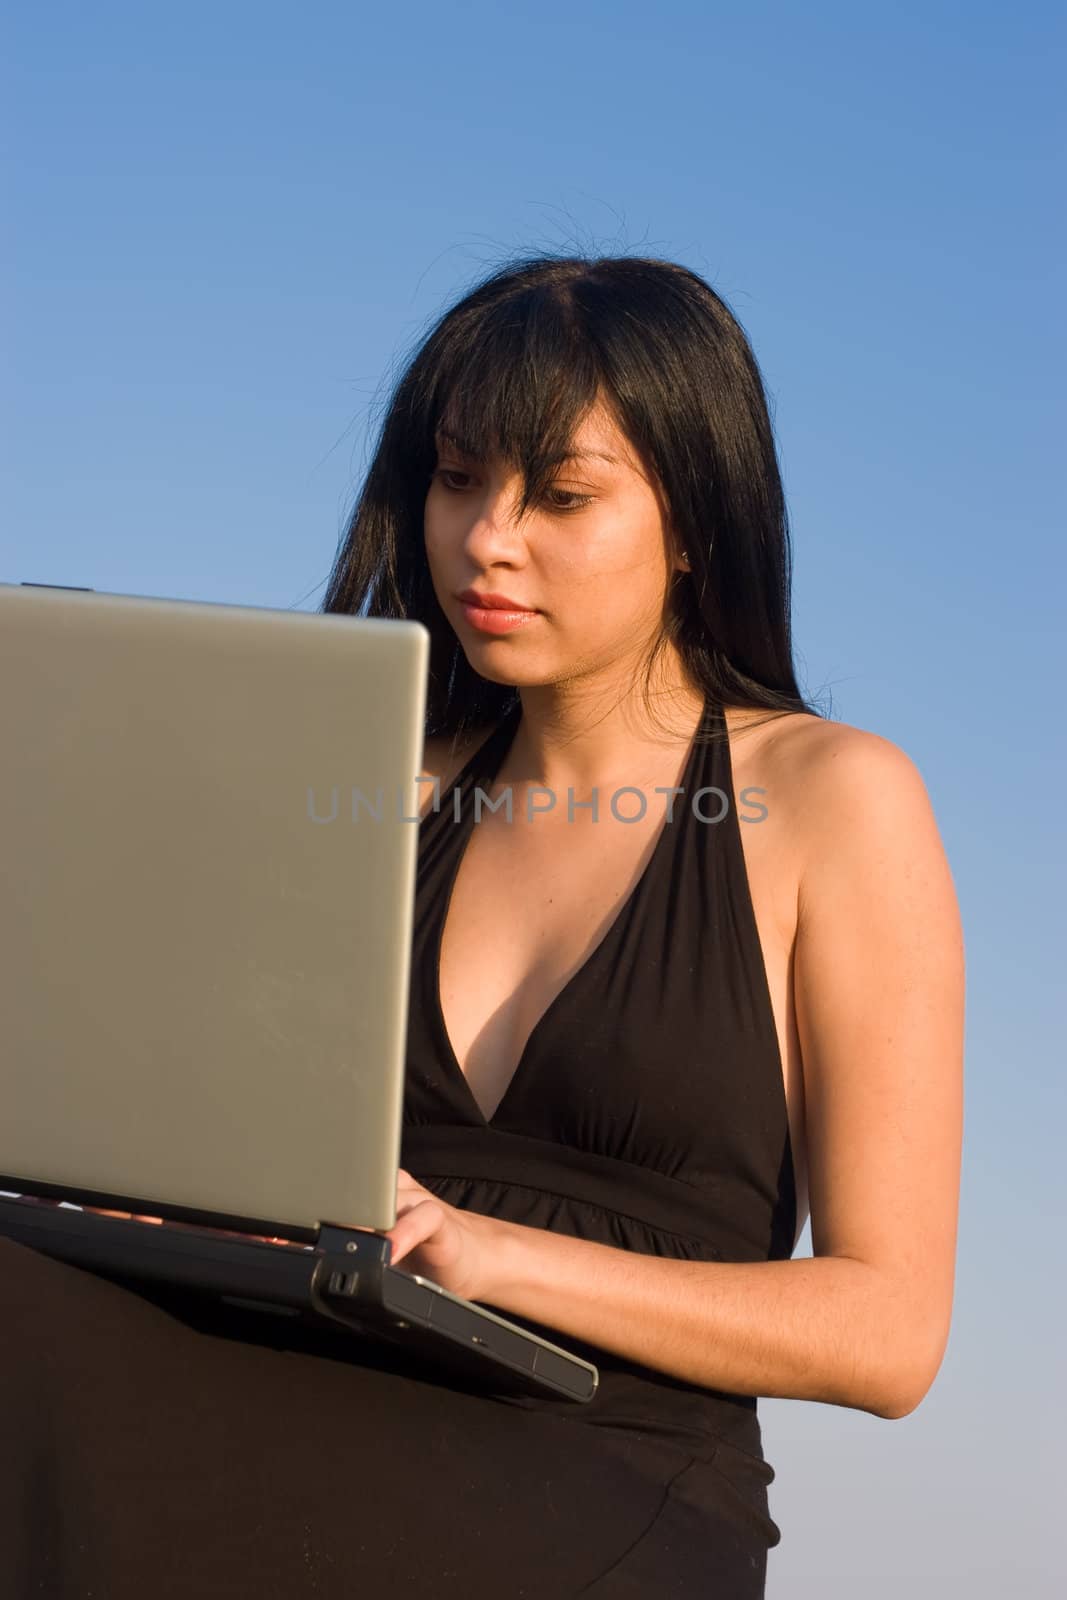 Attractive woman working on a laptop with blue sky background